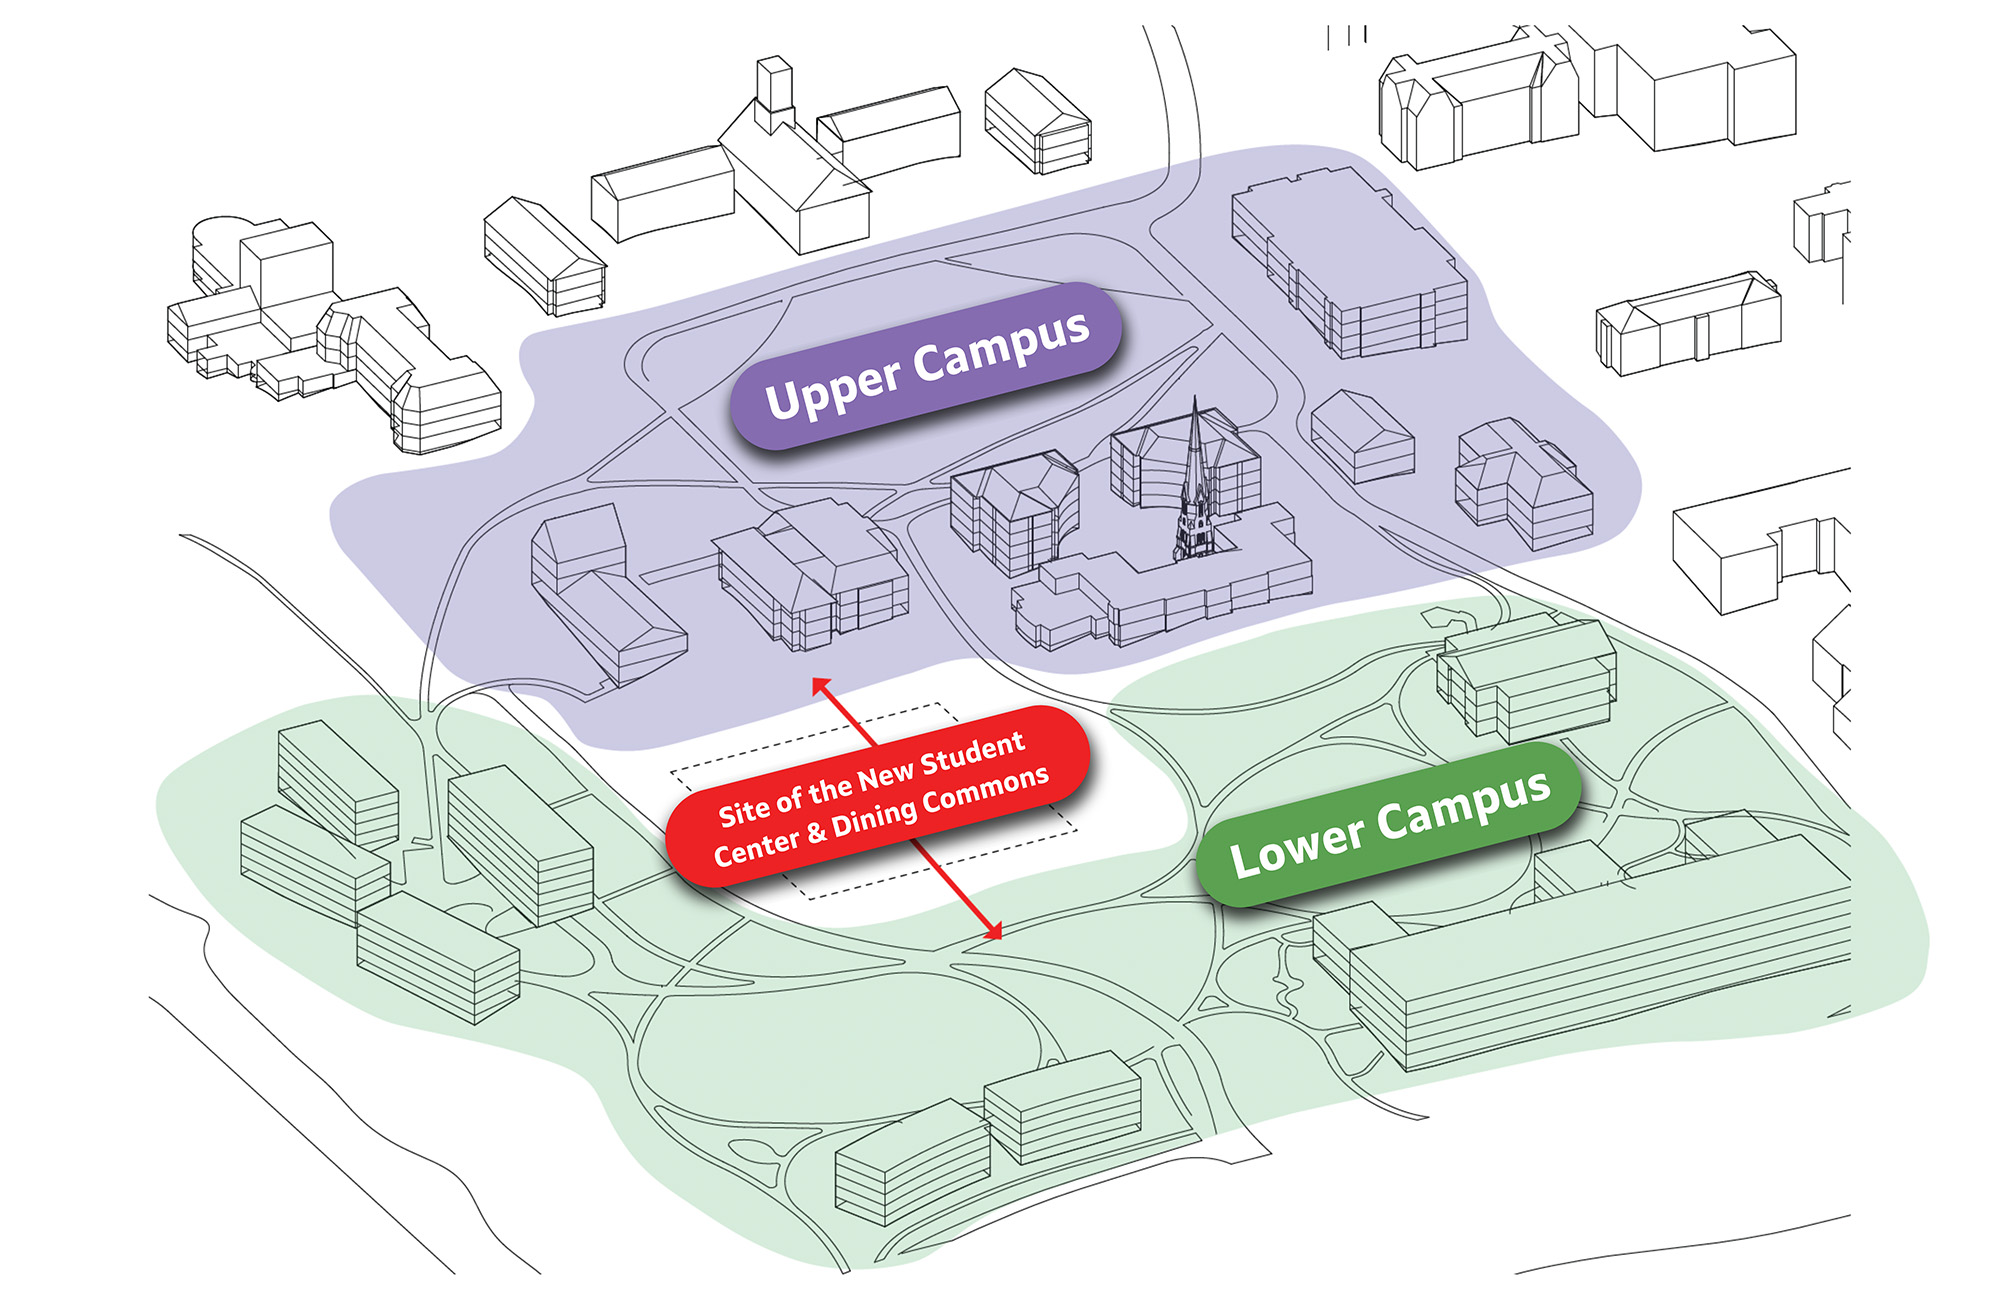 A map of Amherst College campus with an "Upper Campus" label over the quad, a "Lower Campus" label over the Science Center and the new student center inbetween